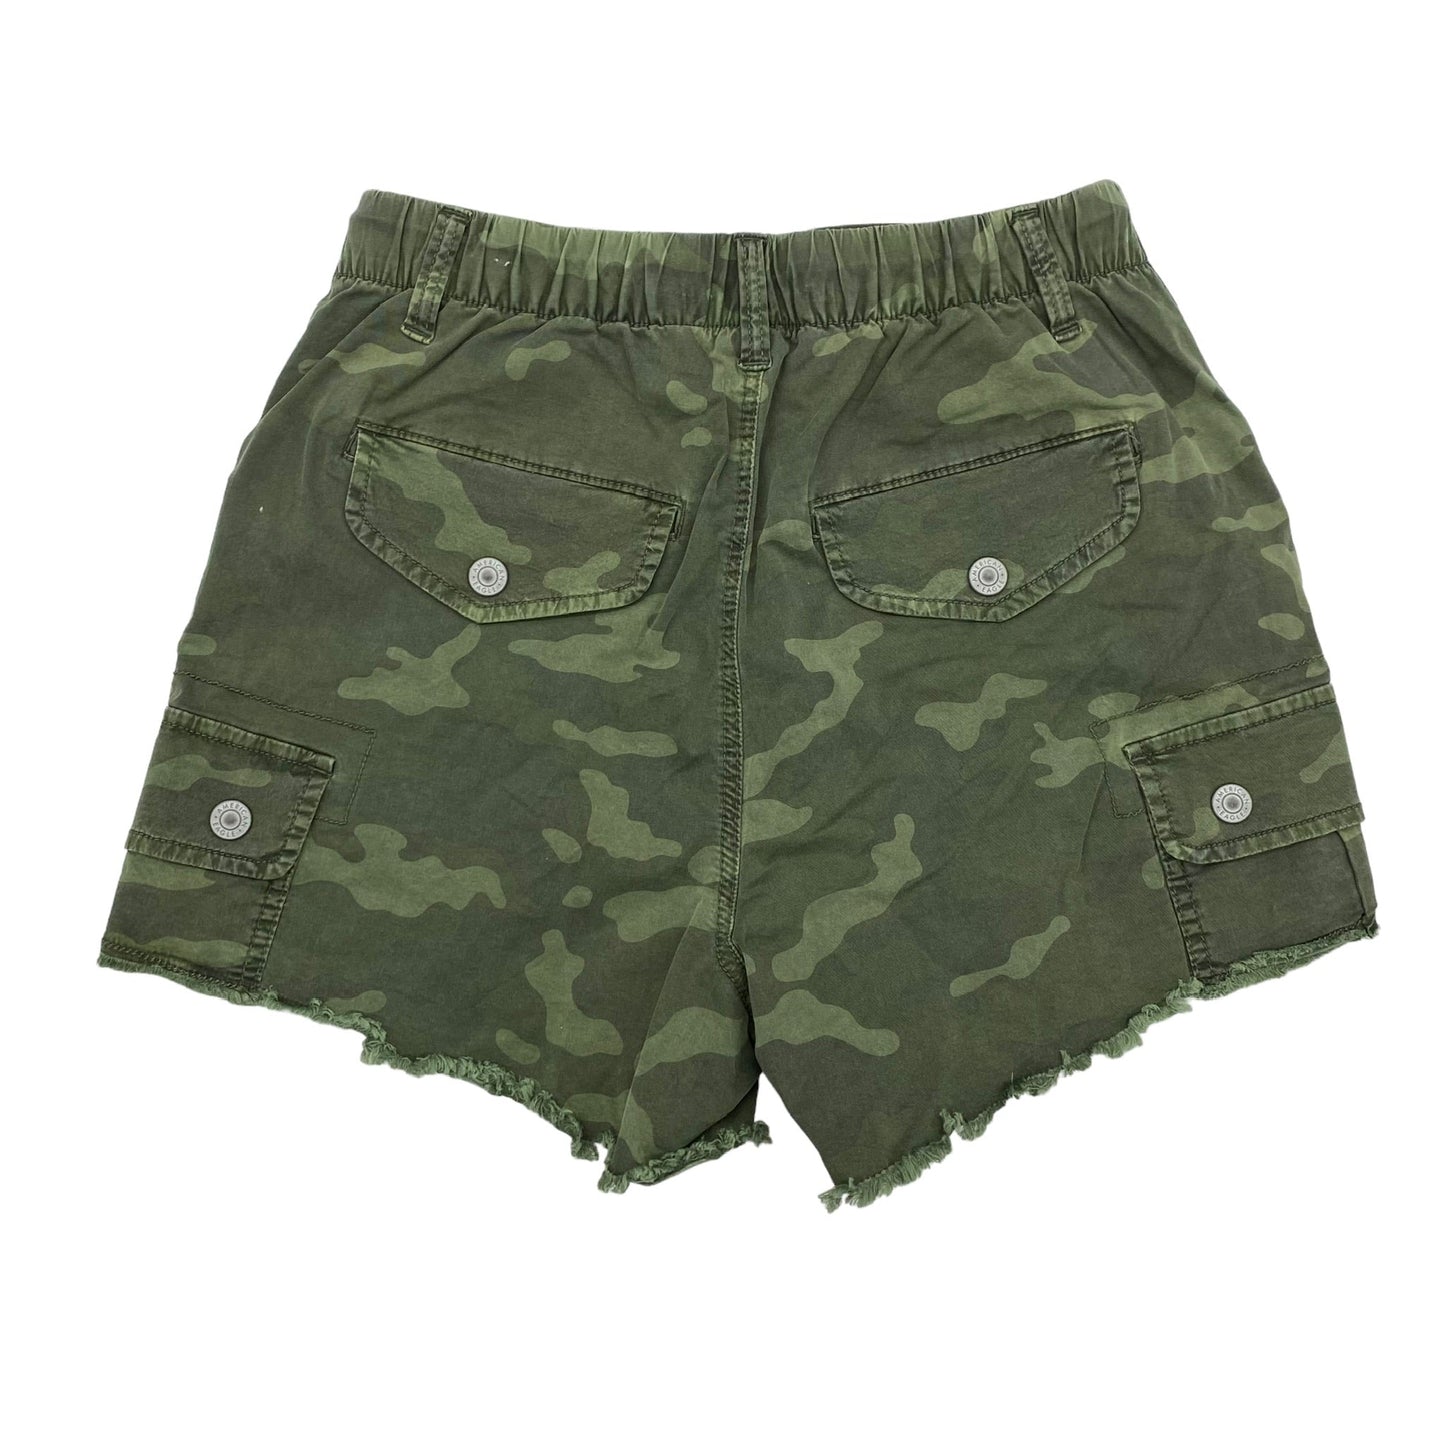 Camouflage Print Shorts American Eagle, Size 4